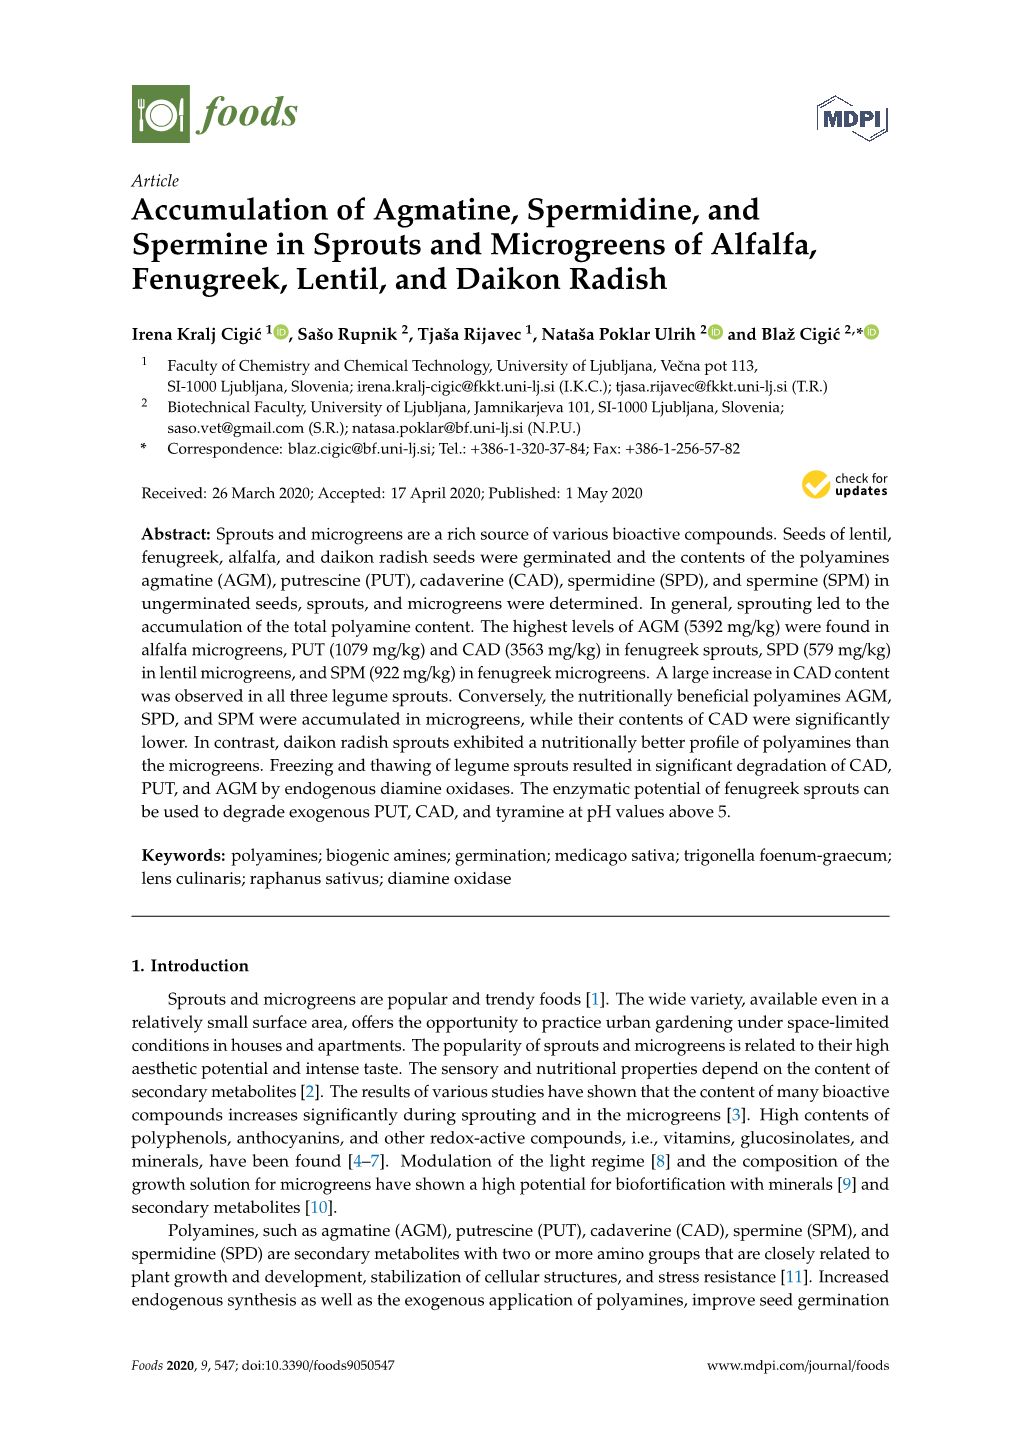 Accumulation of Agmatine, Spermidine, and Spermine in Sprouts and Microgreens of Alfalfa, Fenugreek, Lentil, and Daikon Radish